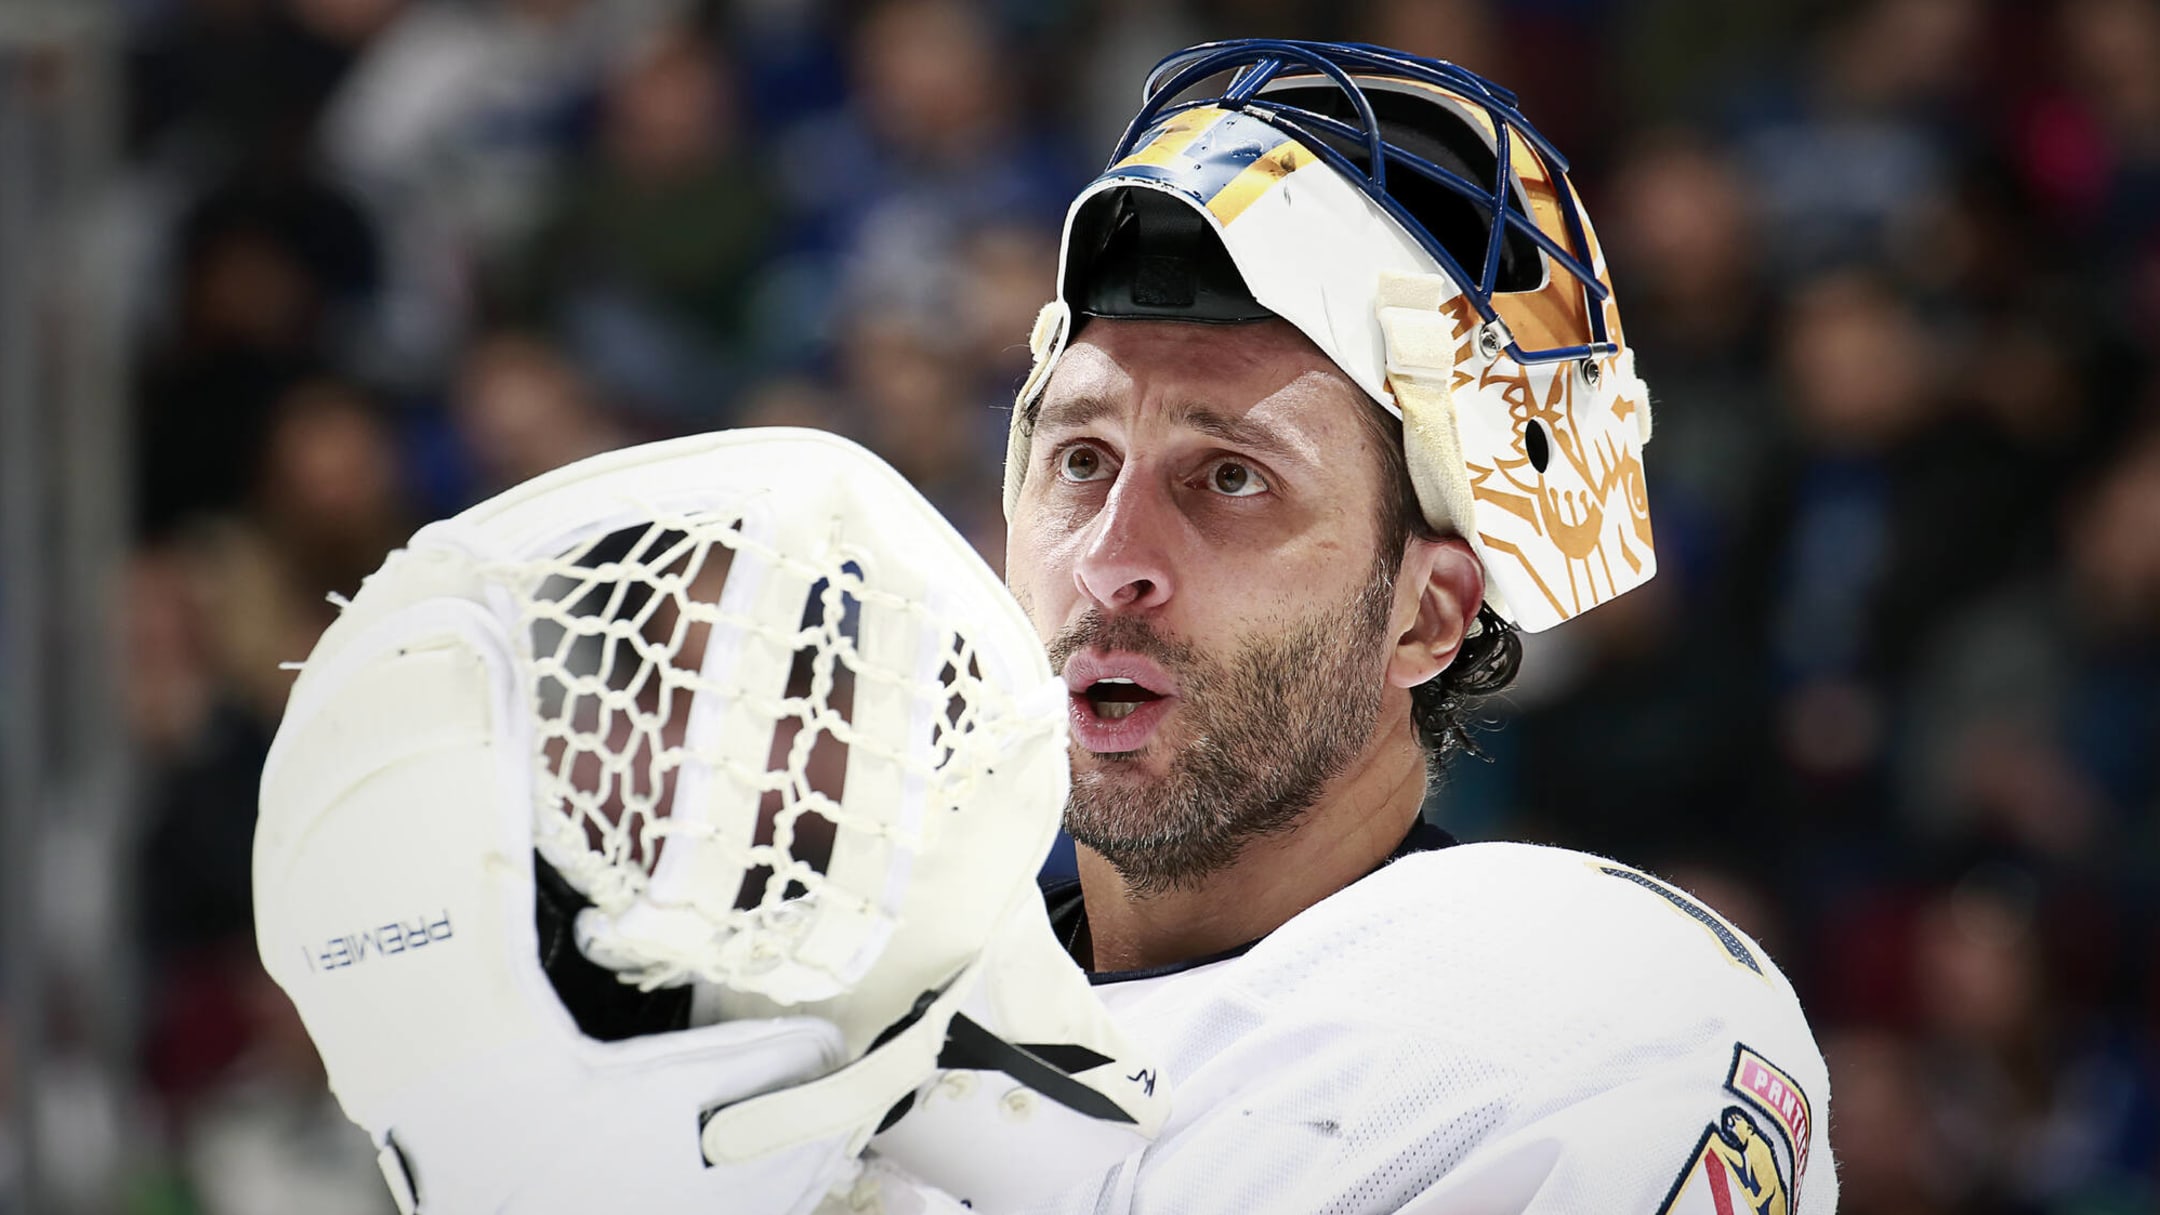 Did Roberto Luongo Deserve to Have his Number Retired by the